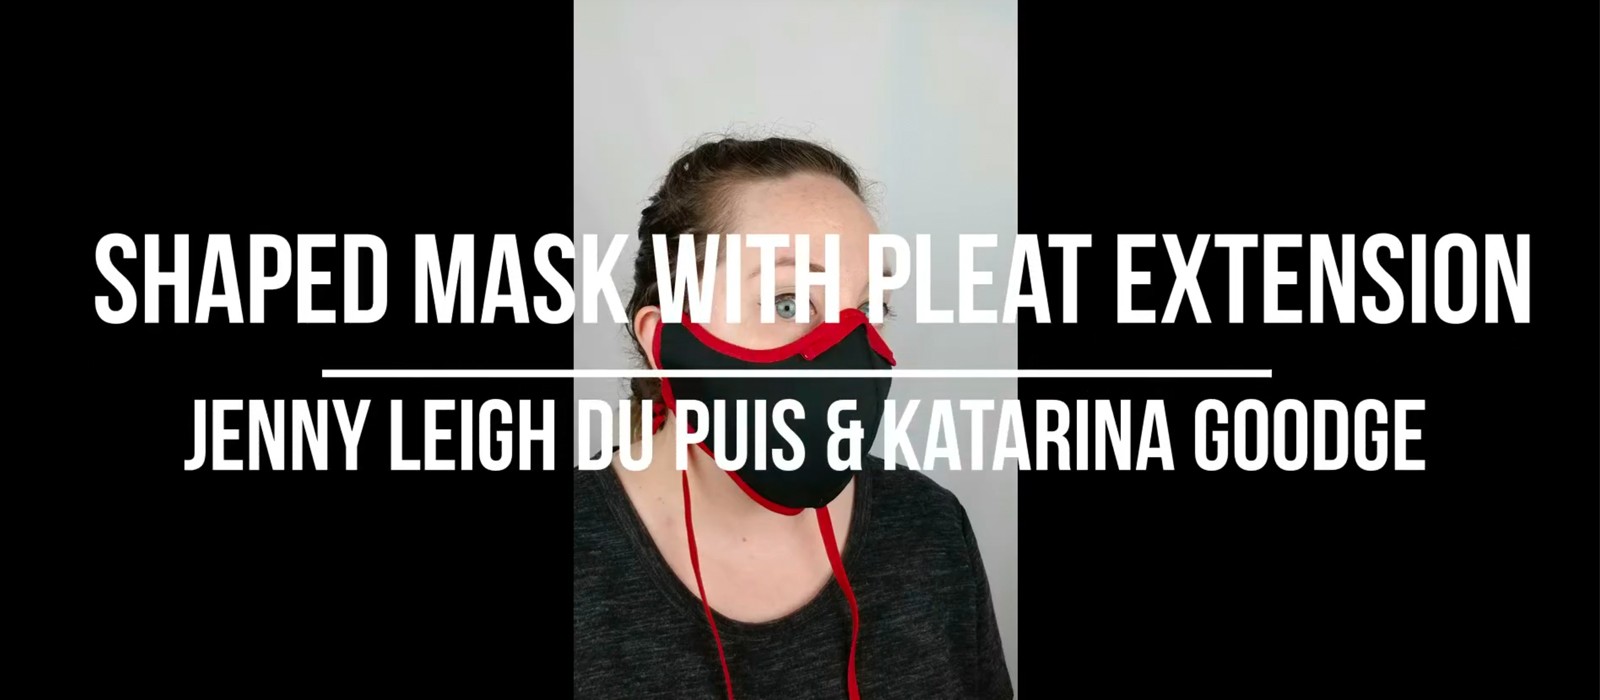 Mask with text explanation